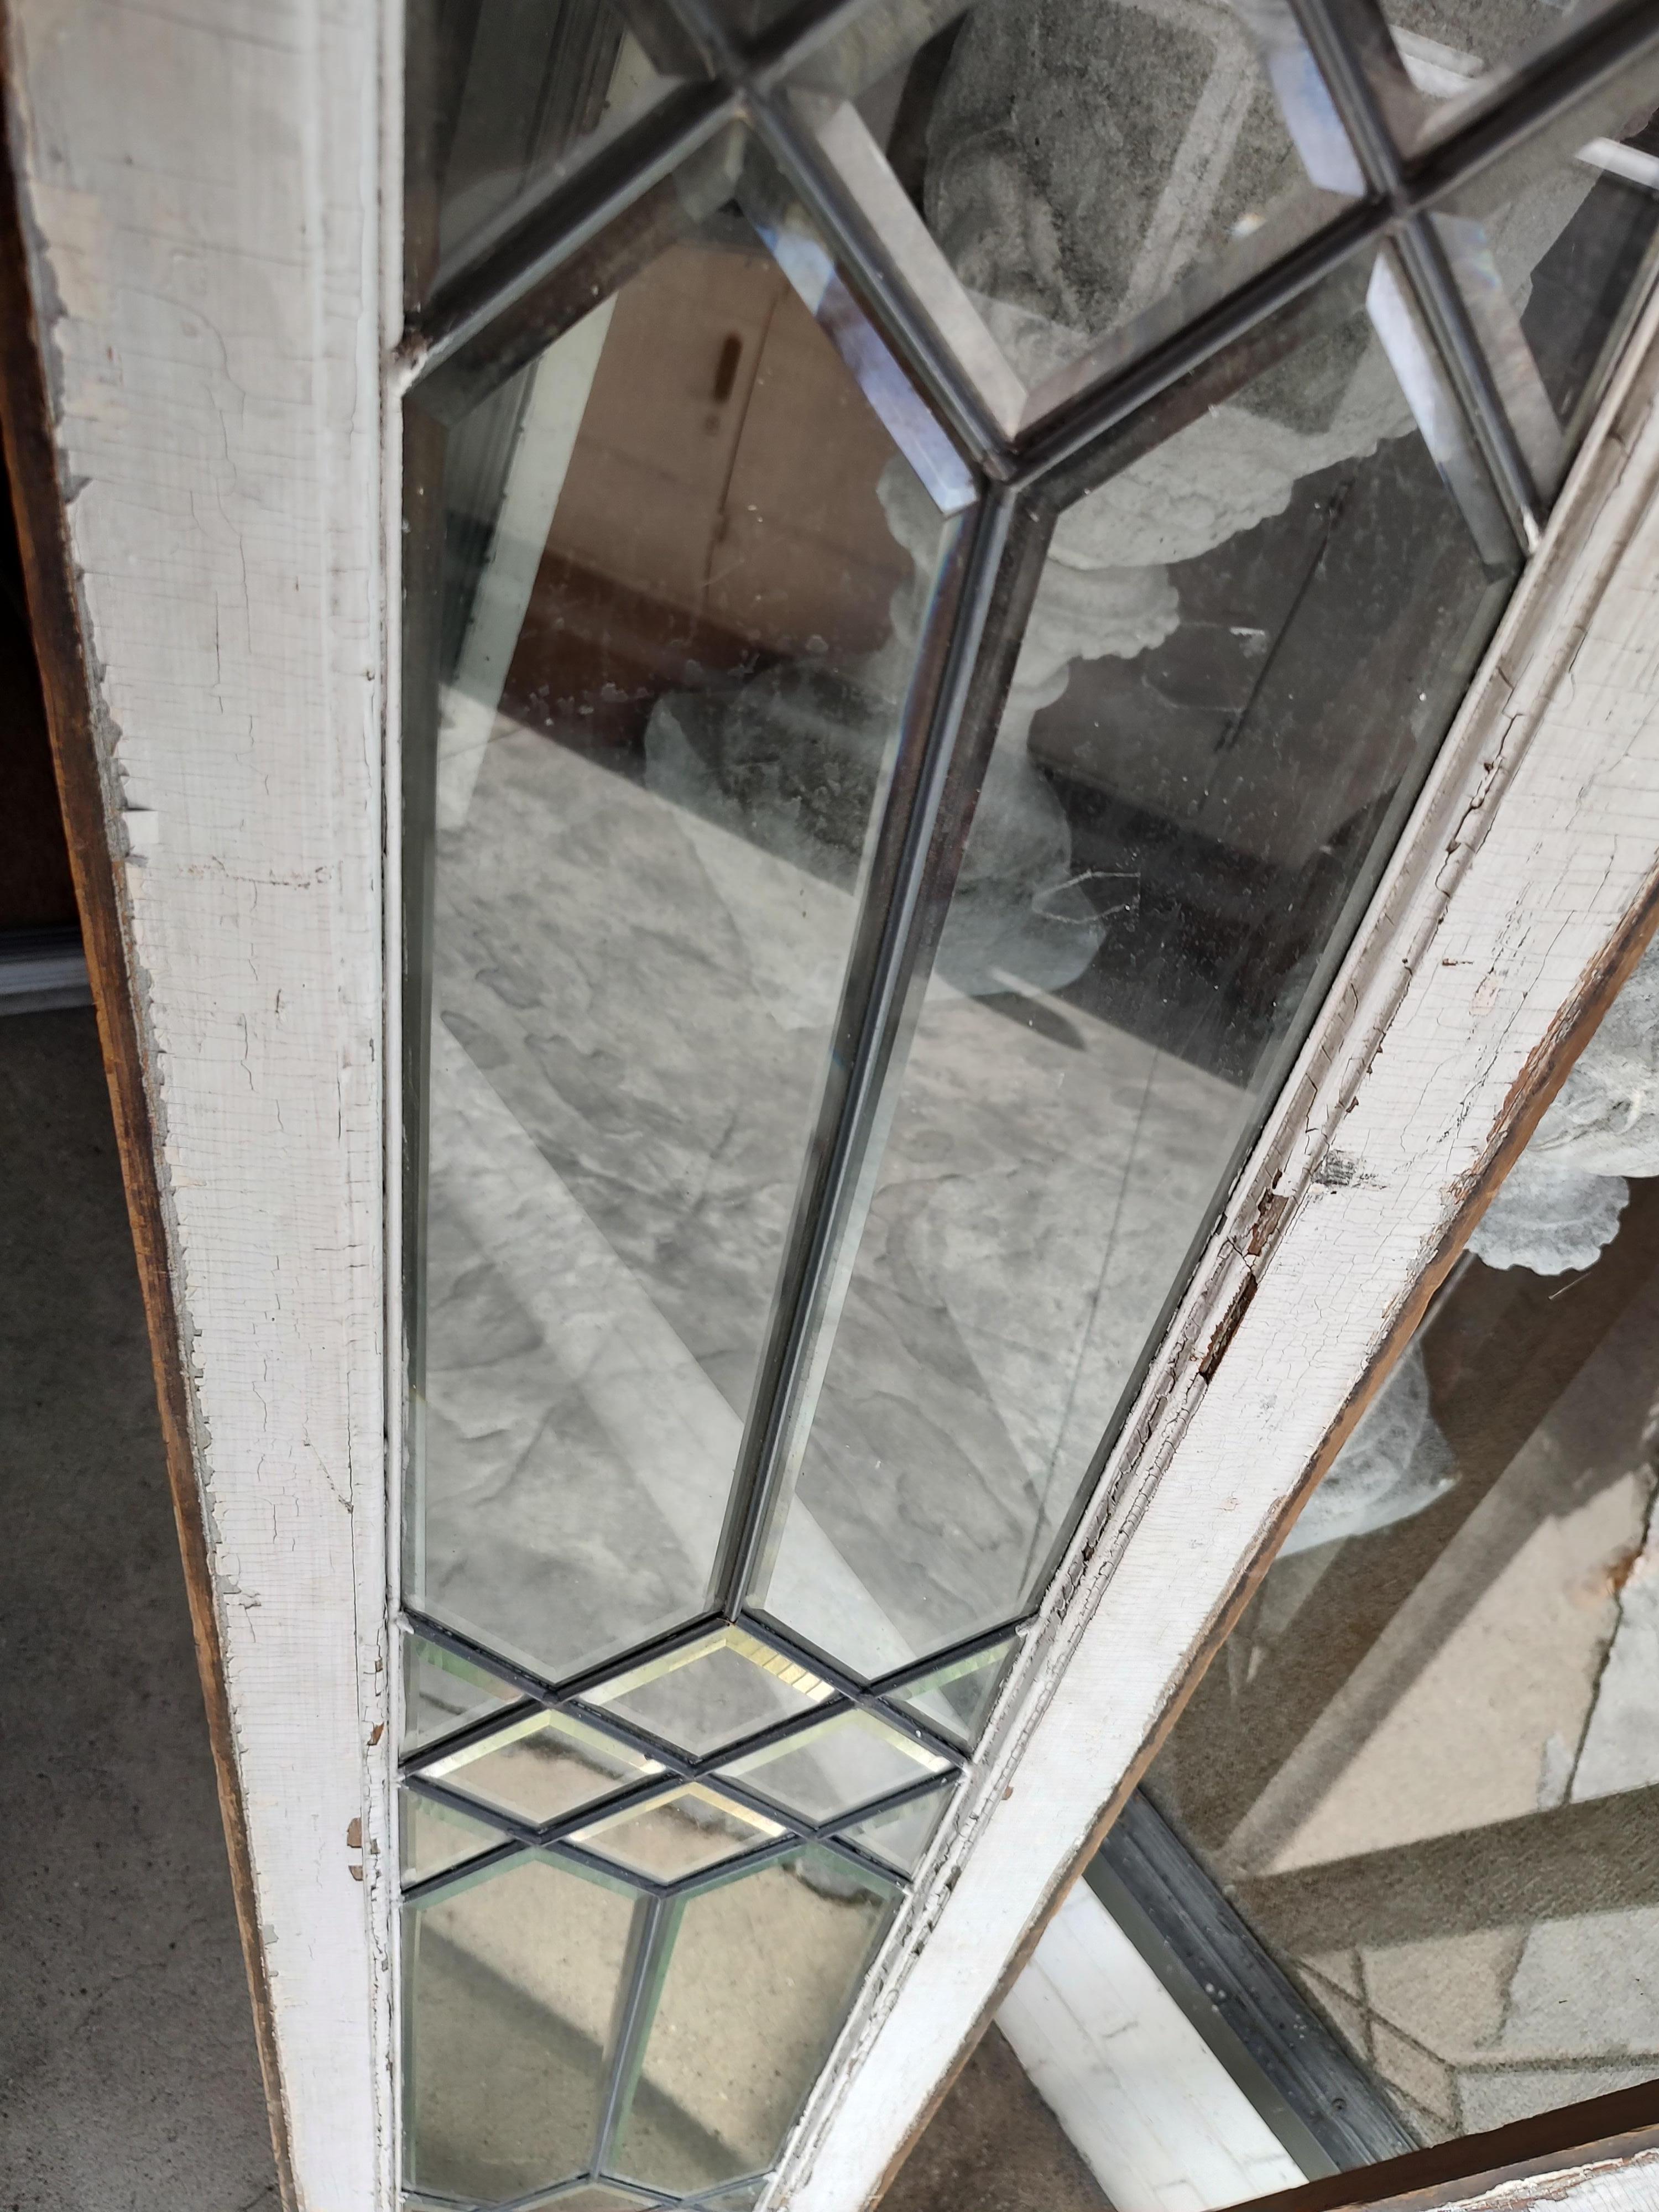 Fabulous pair of Early 20thc antique beveled Glass Sidelight Windows. In excellent antique condition with no damage at all. Glass is perfect. Wood frames are mortise and tenon construction. Old paint on both sides.